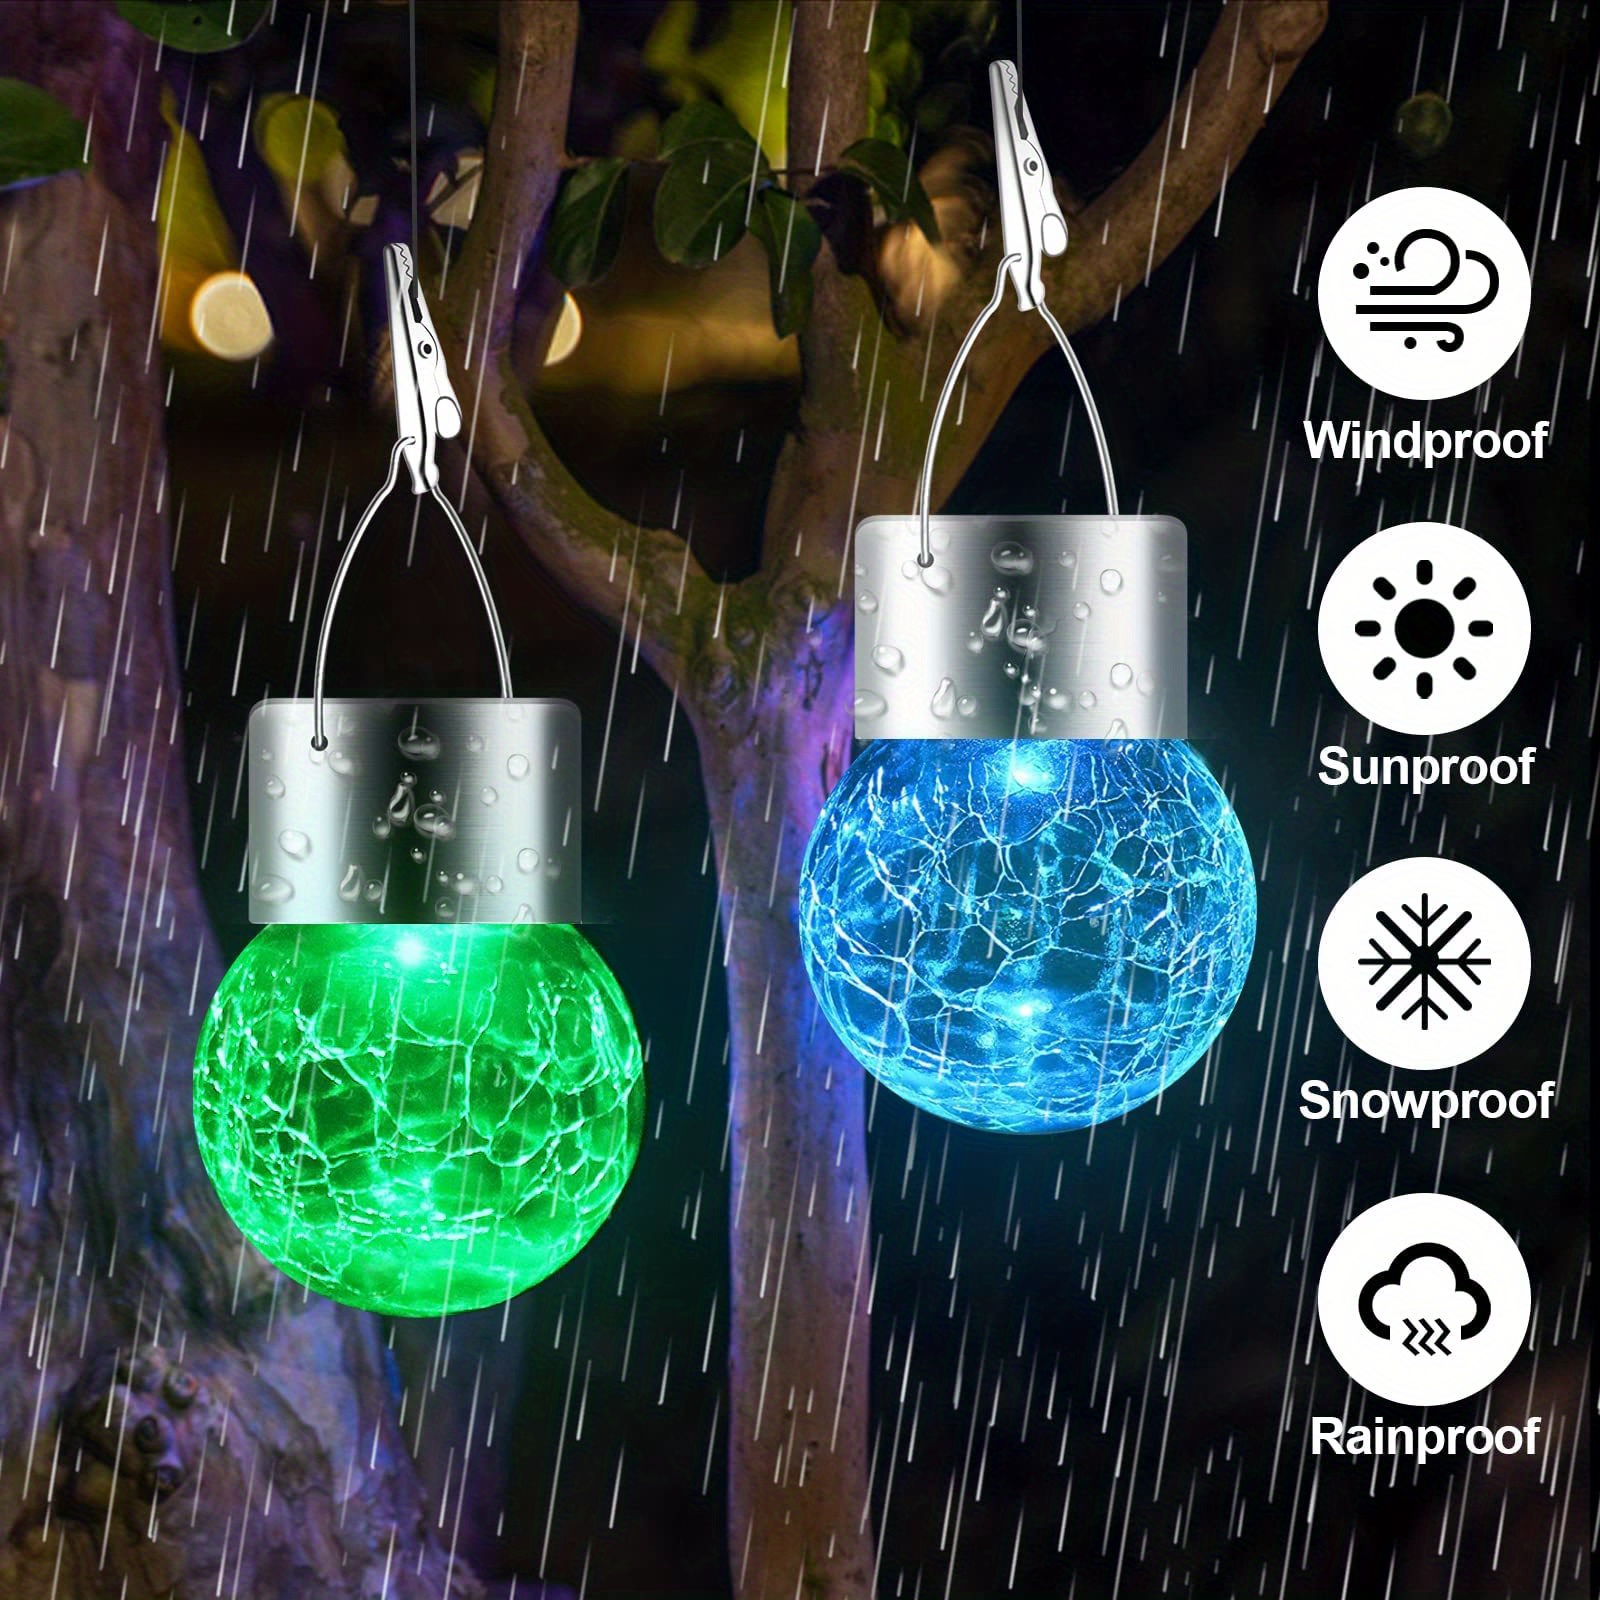 brighten your garden with 12 packs of decorative hanging solar lights waterproof multicolor warmwhite options details 10